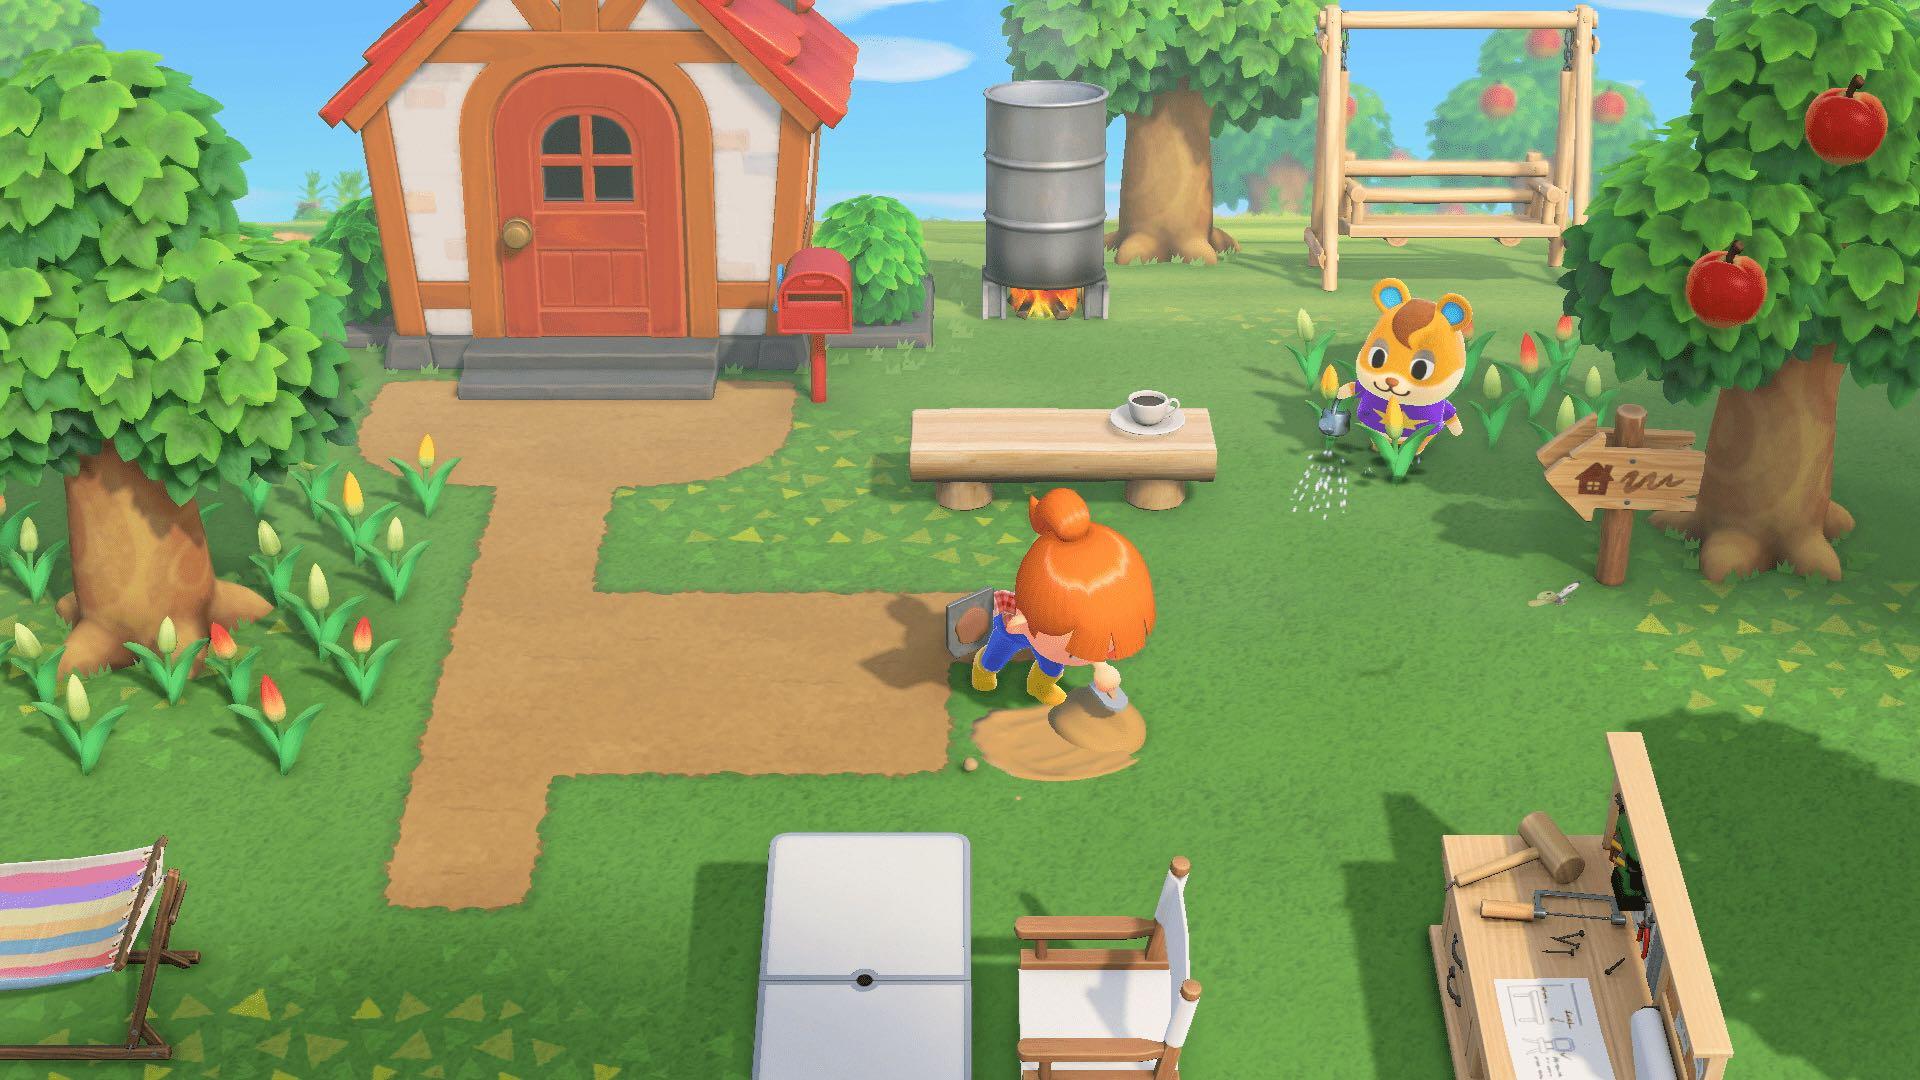 A scene from the video game, Animal Crossing: New Horizons.